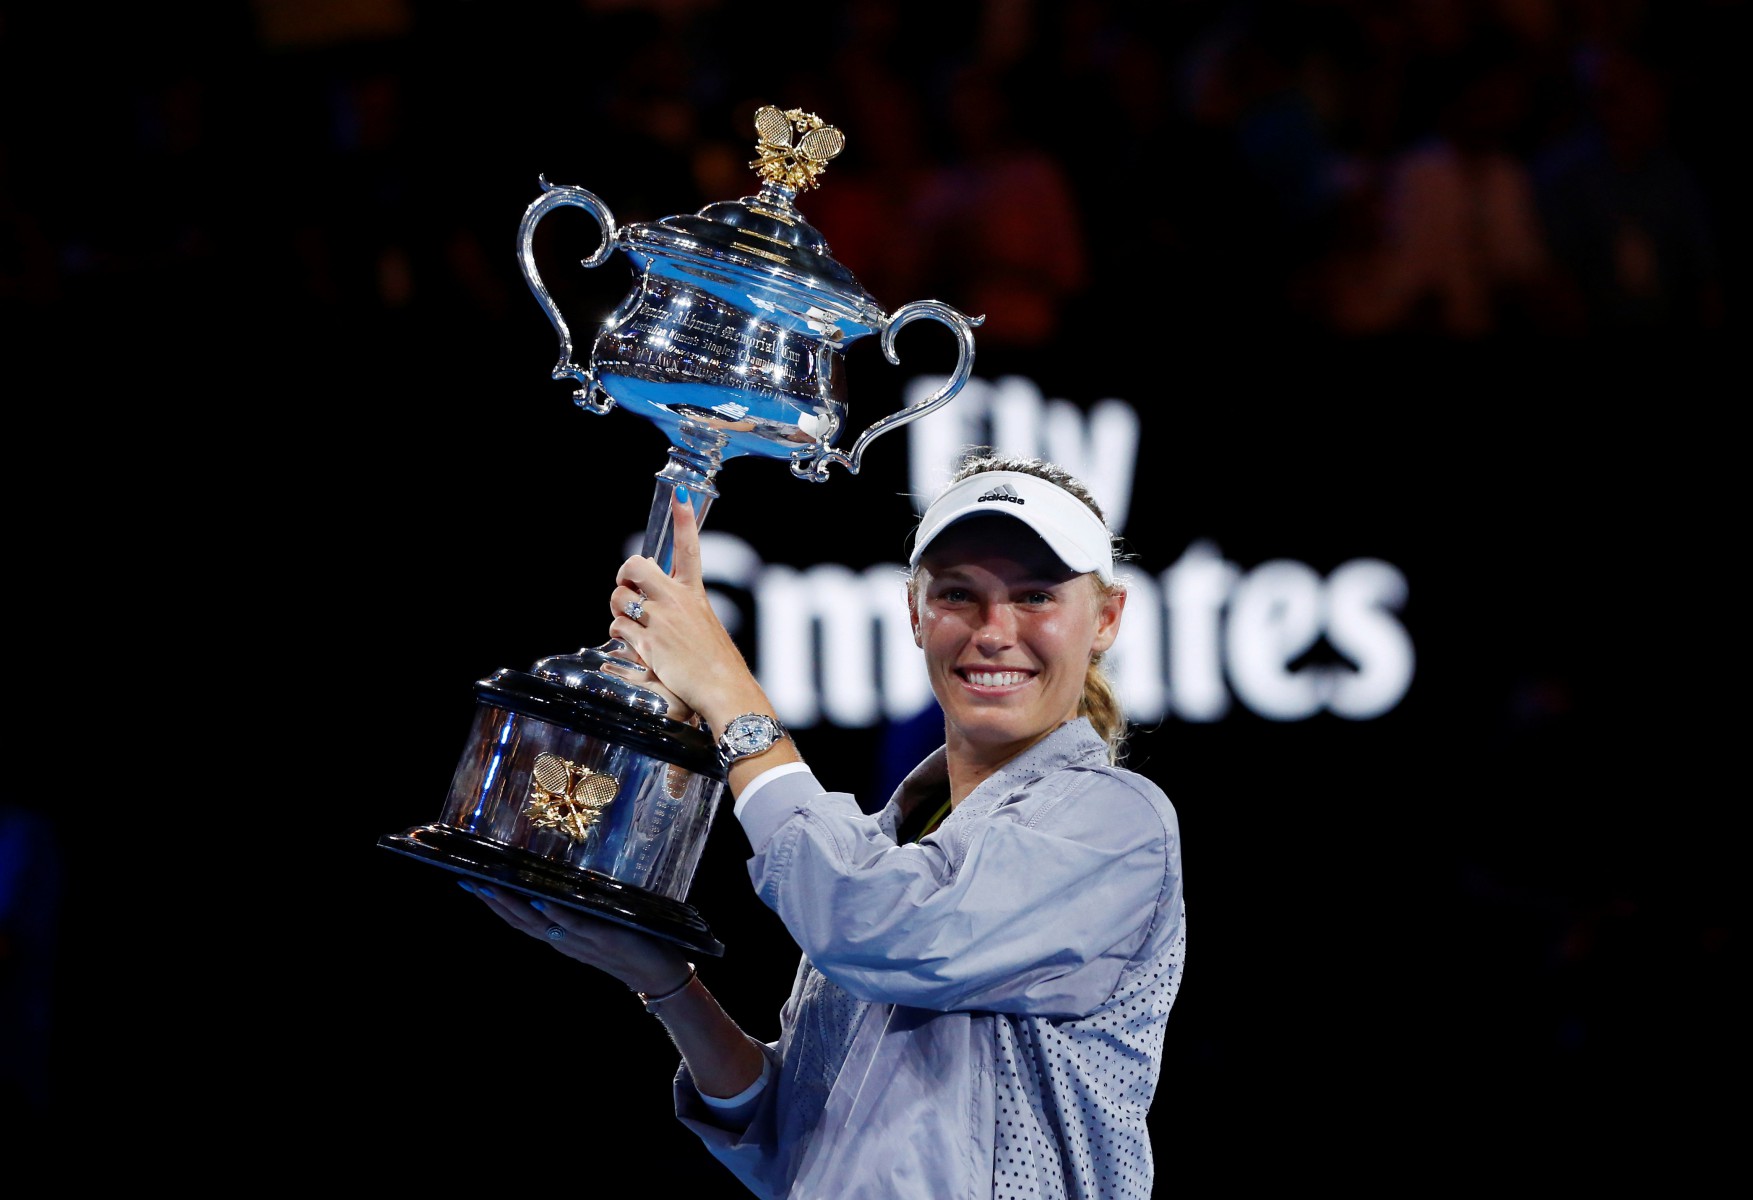 , Australian Open 2020 FREE: Live stream, TV channel, full schedule, and bushfire info for first Grand Slam of year